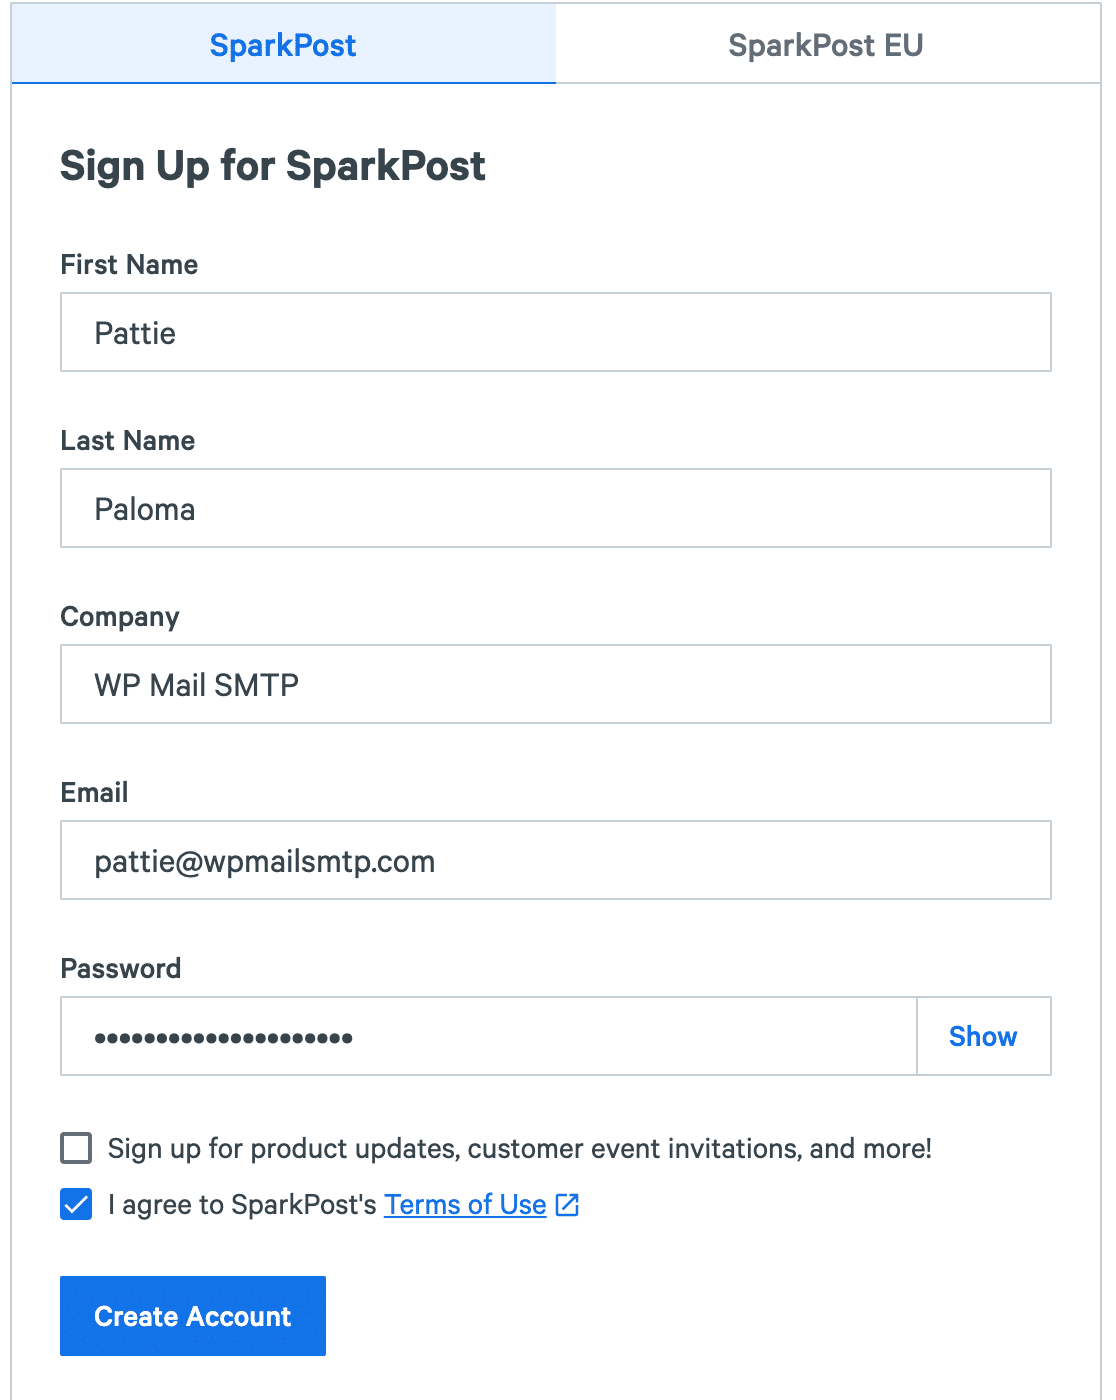 Creating a new SparkPost account